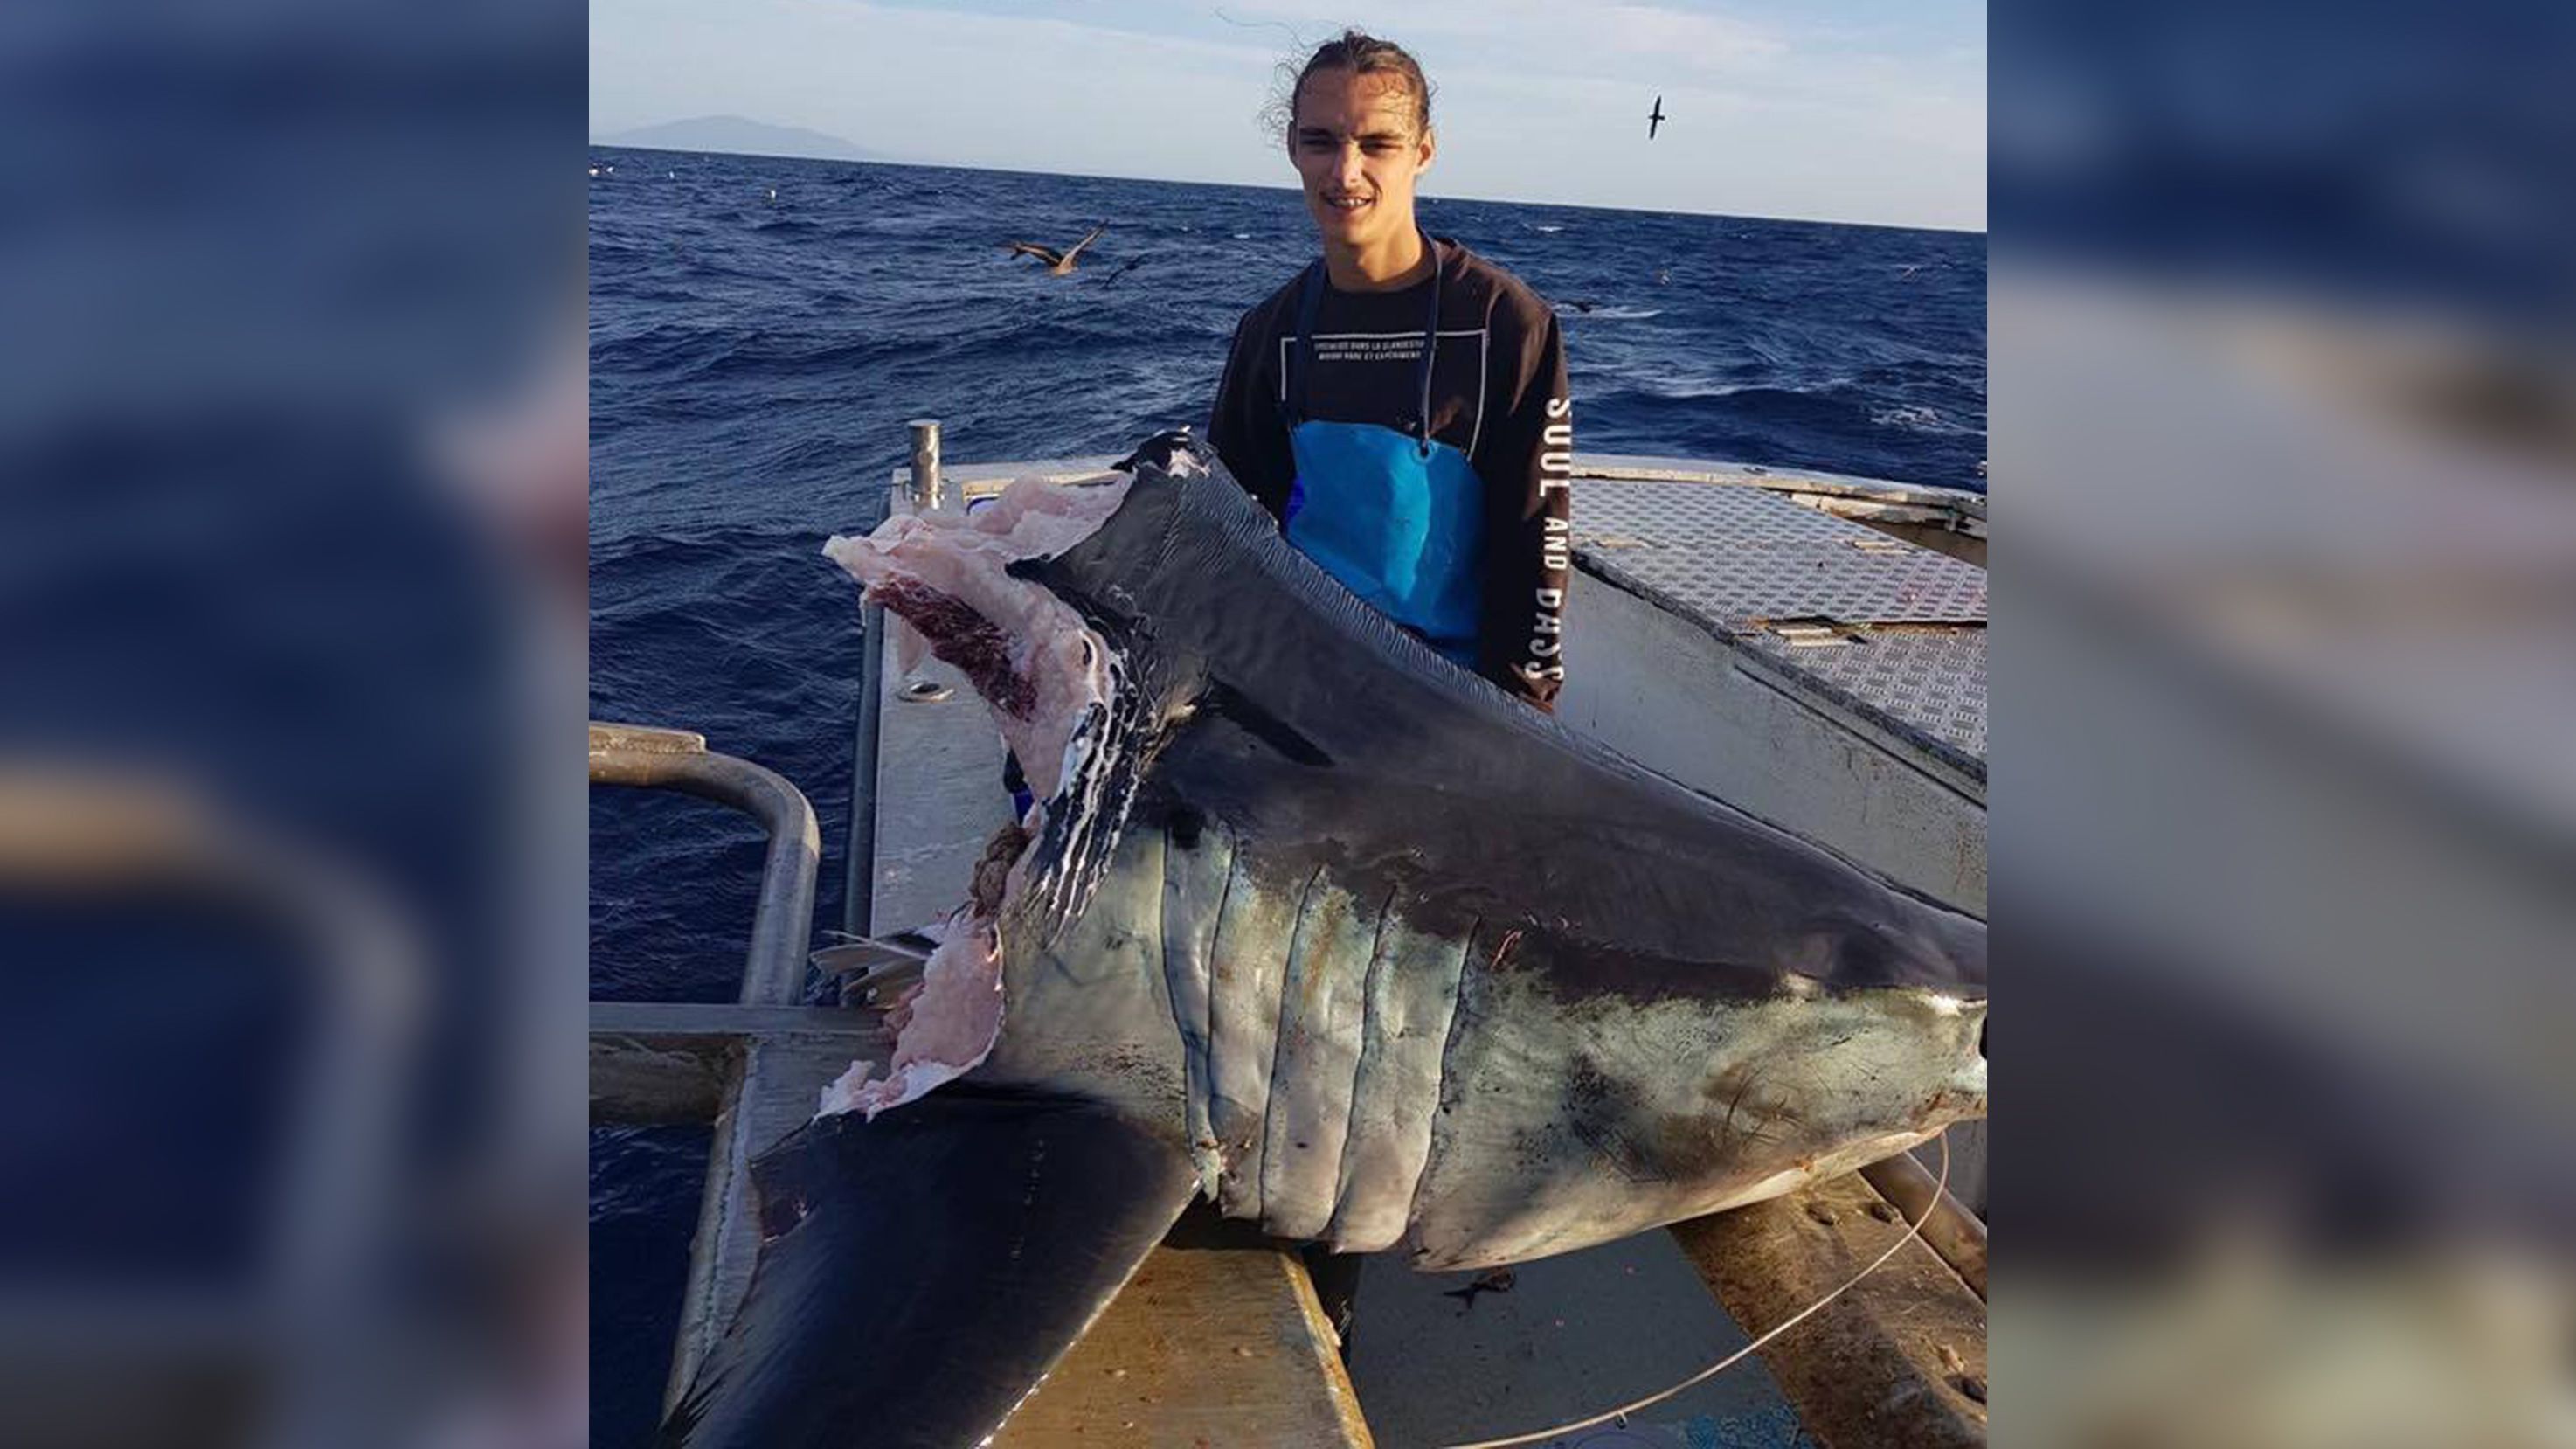 biggest shark in the world caught on video